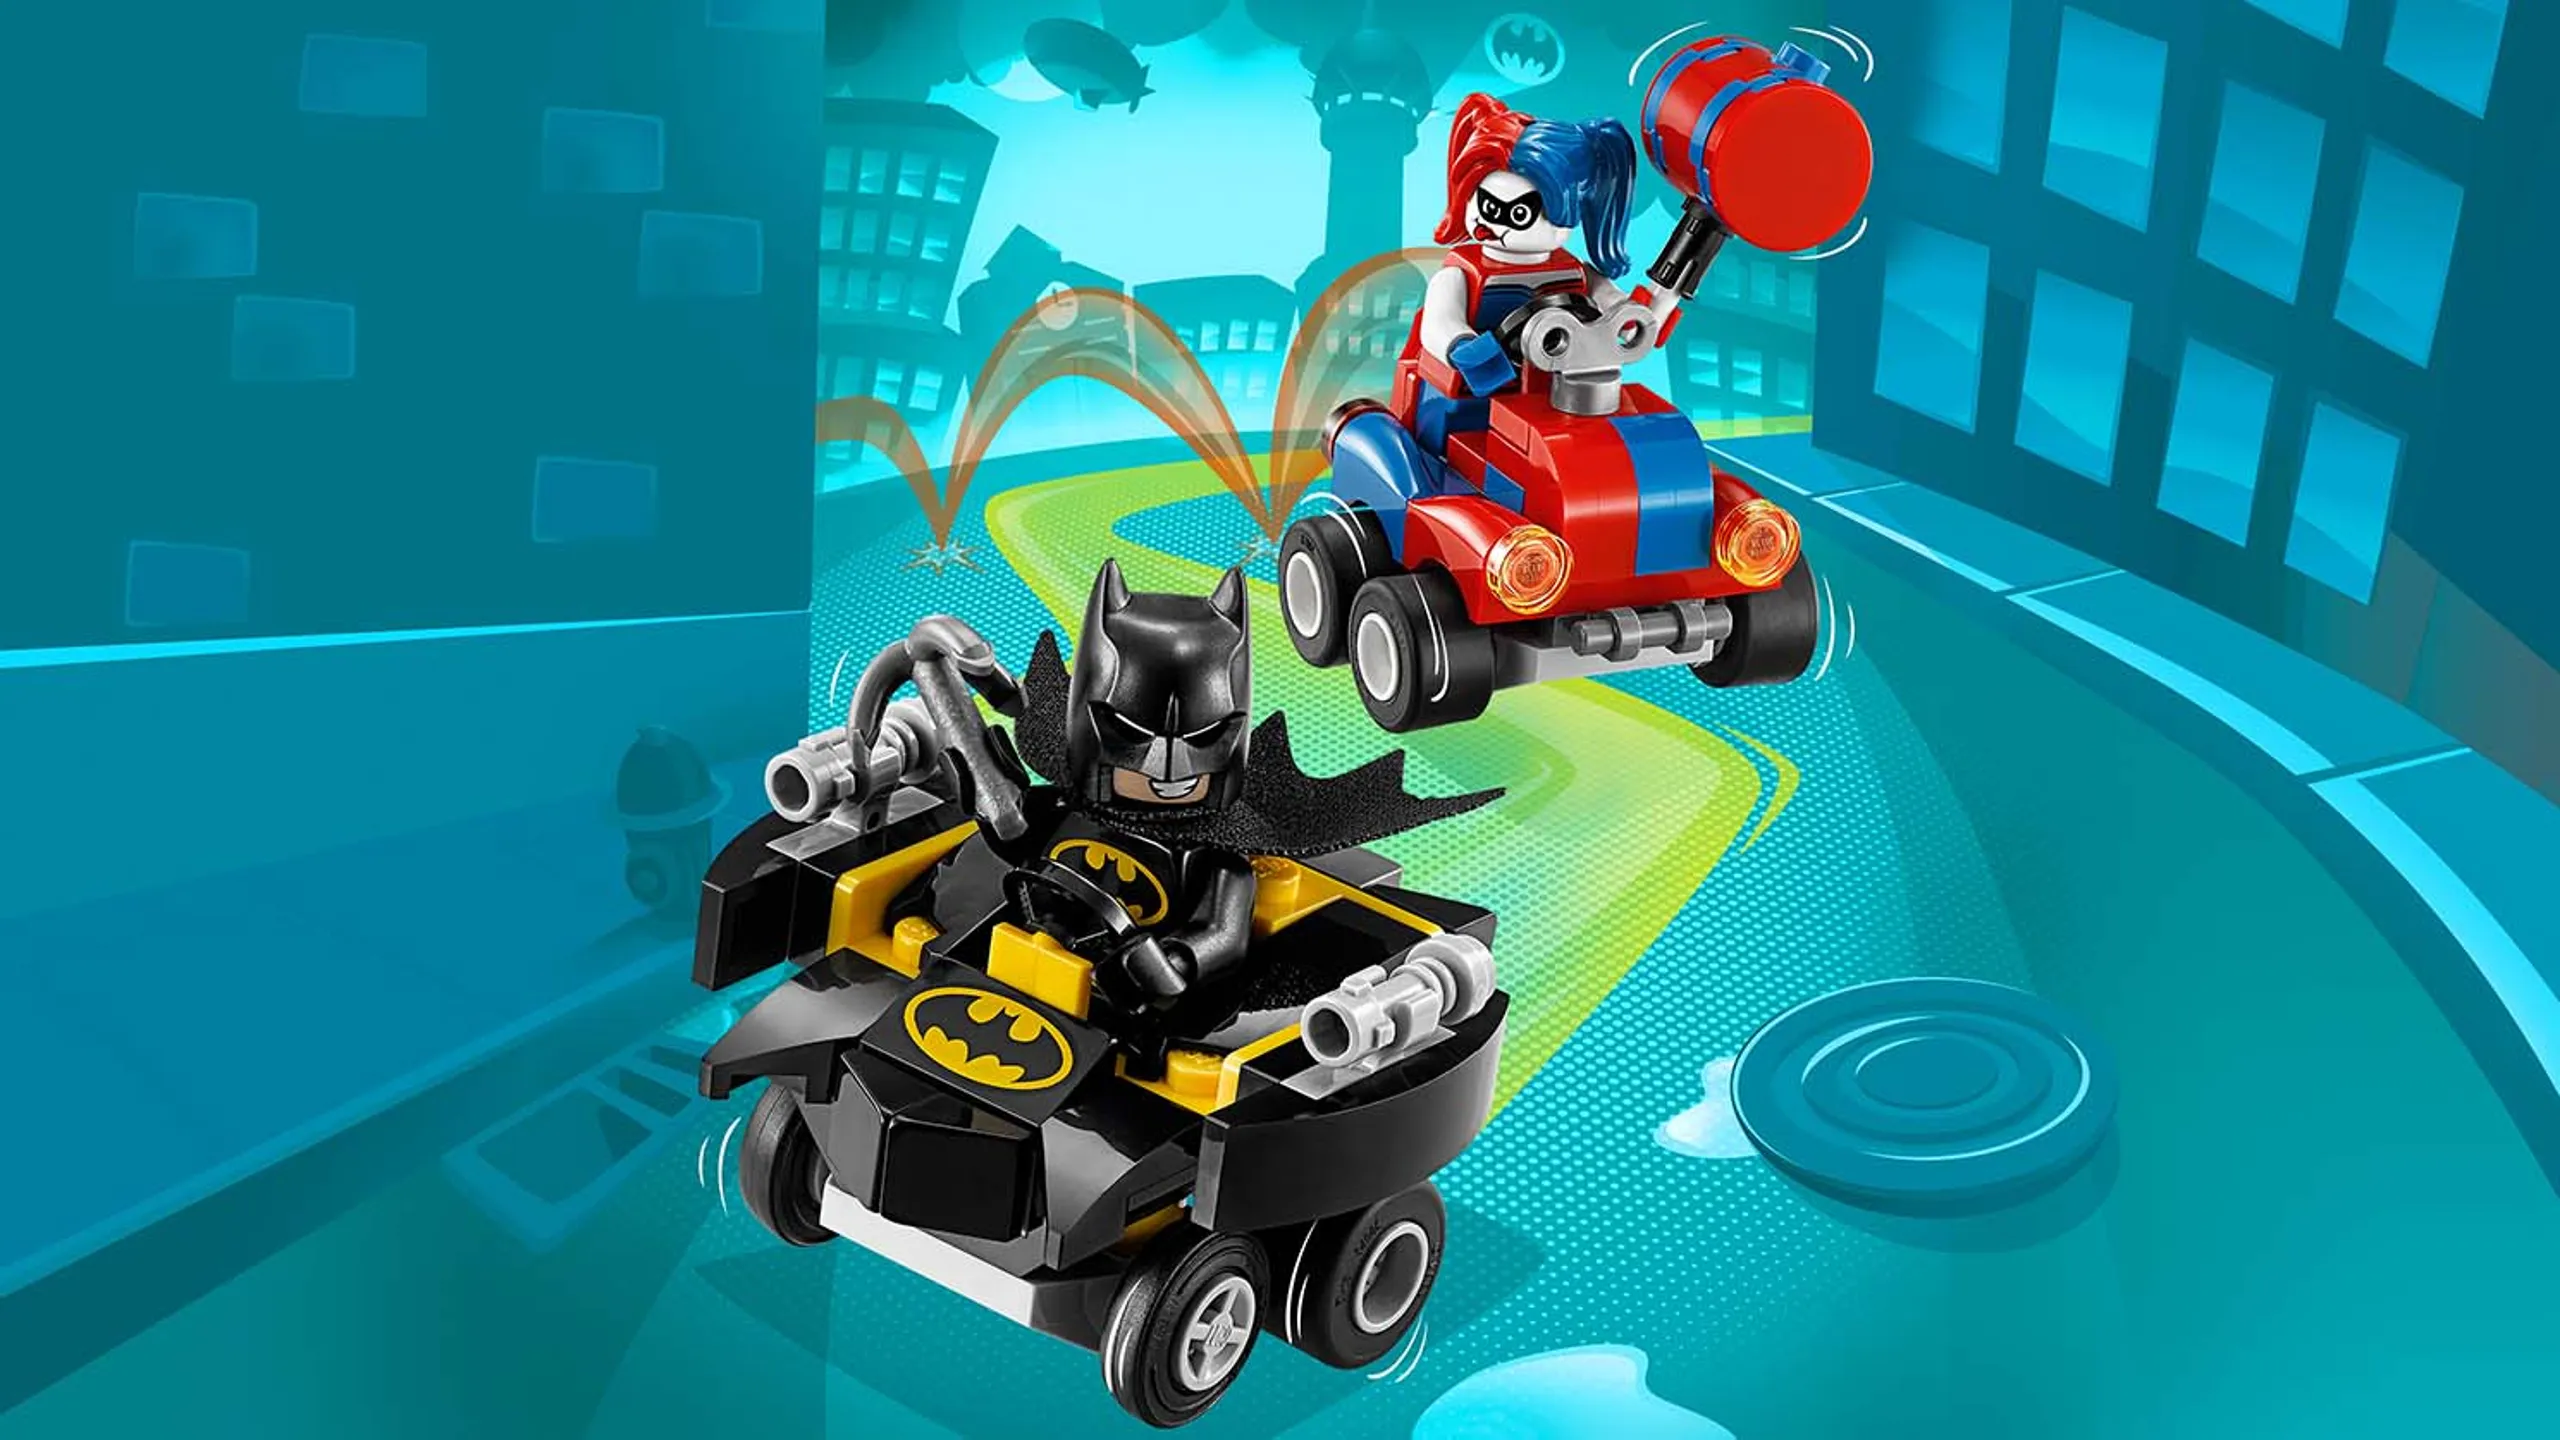 LEGO Super Heroes - 76092 Mighty Micros: Batman vs. Harley Quinn - In this epic duel Batman has his Batwing and grappling hook and Harley Quinn has geared up with her ‘Wind-Up’ car and giant mallet.